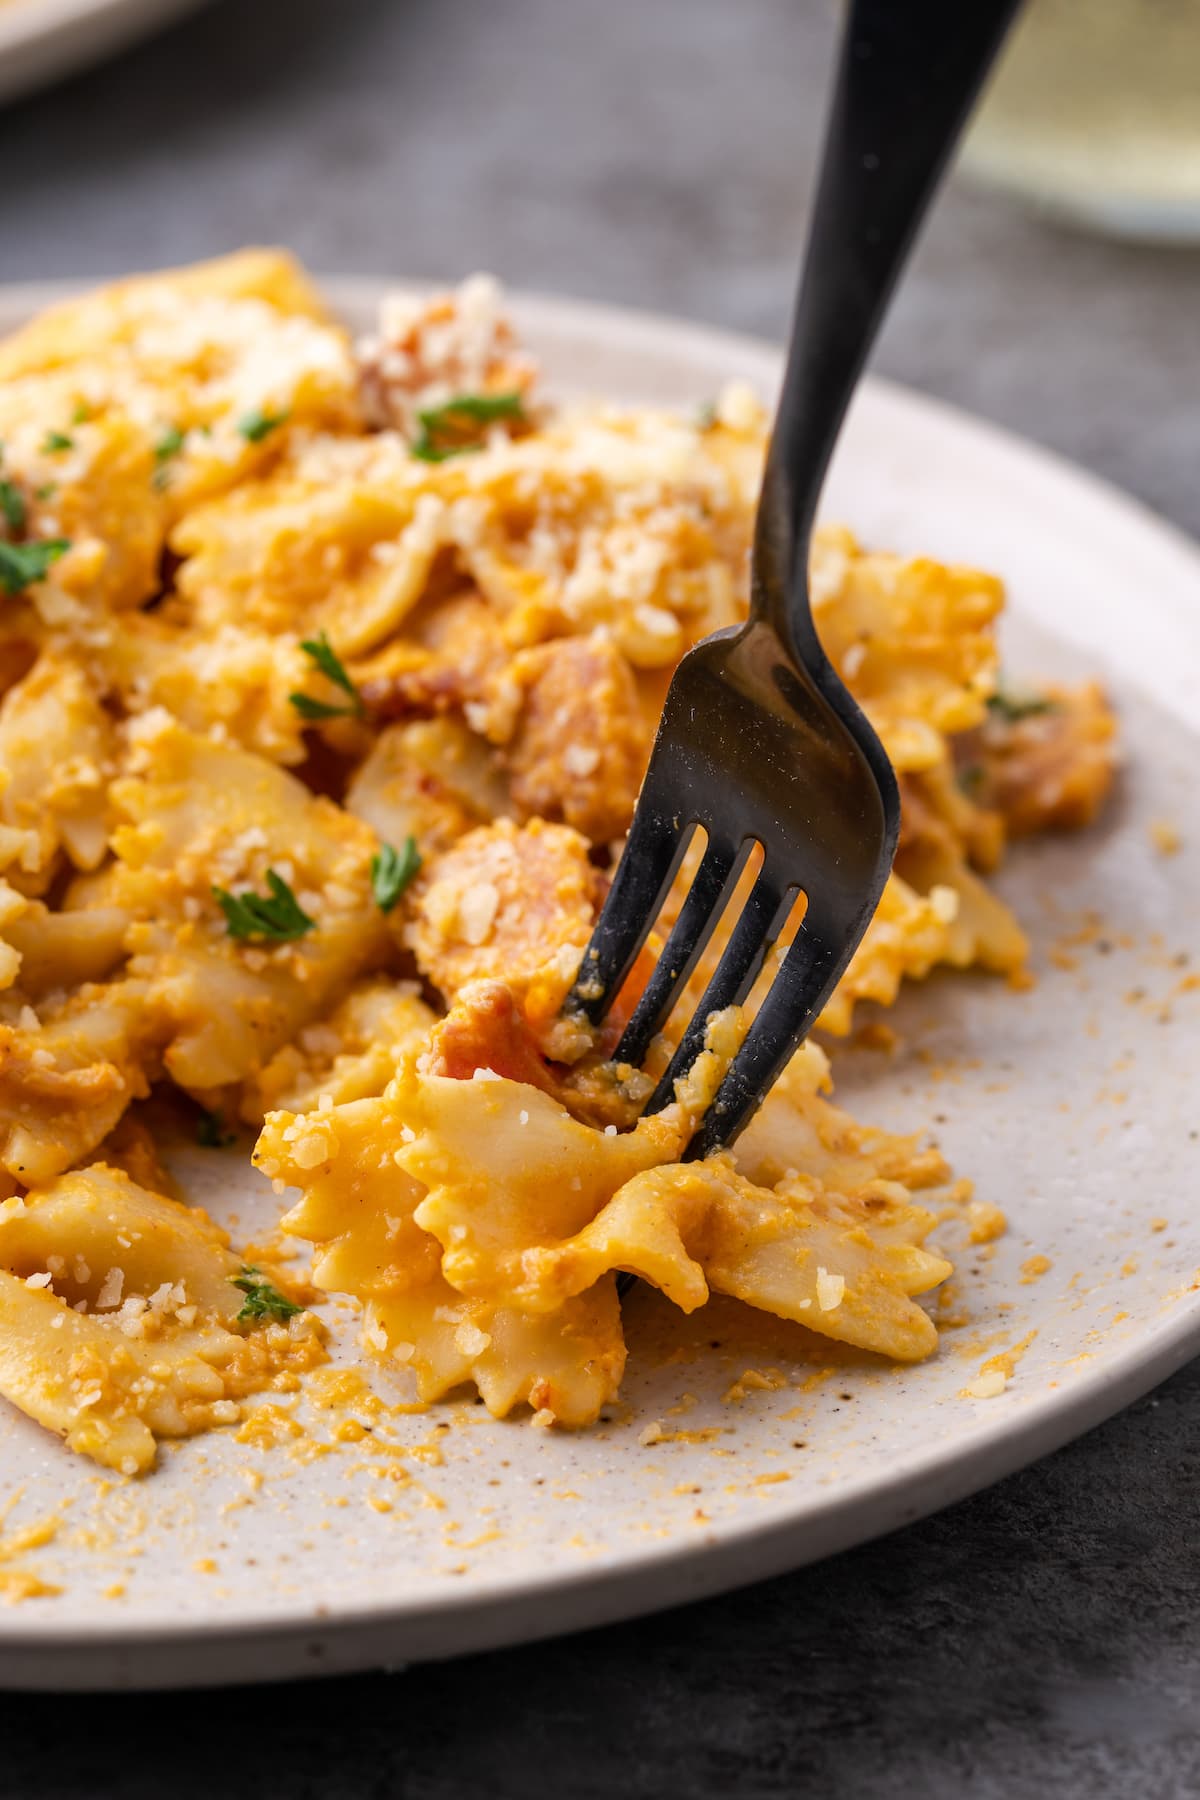 A fork picks up a bite of farfalle pumpkin pasta with bacon from a plate.